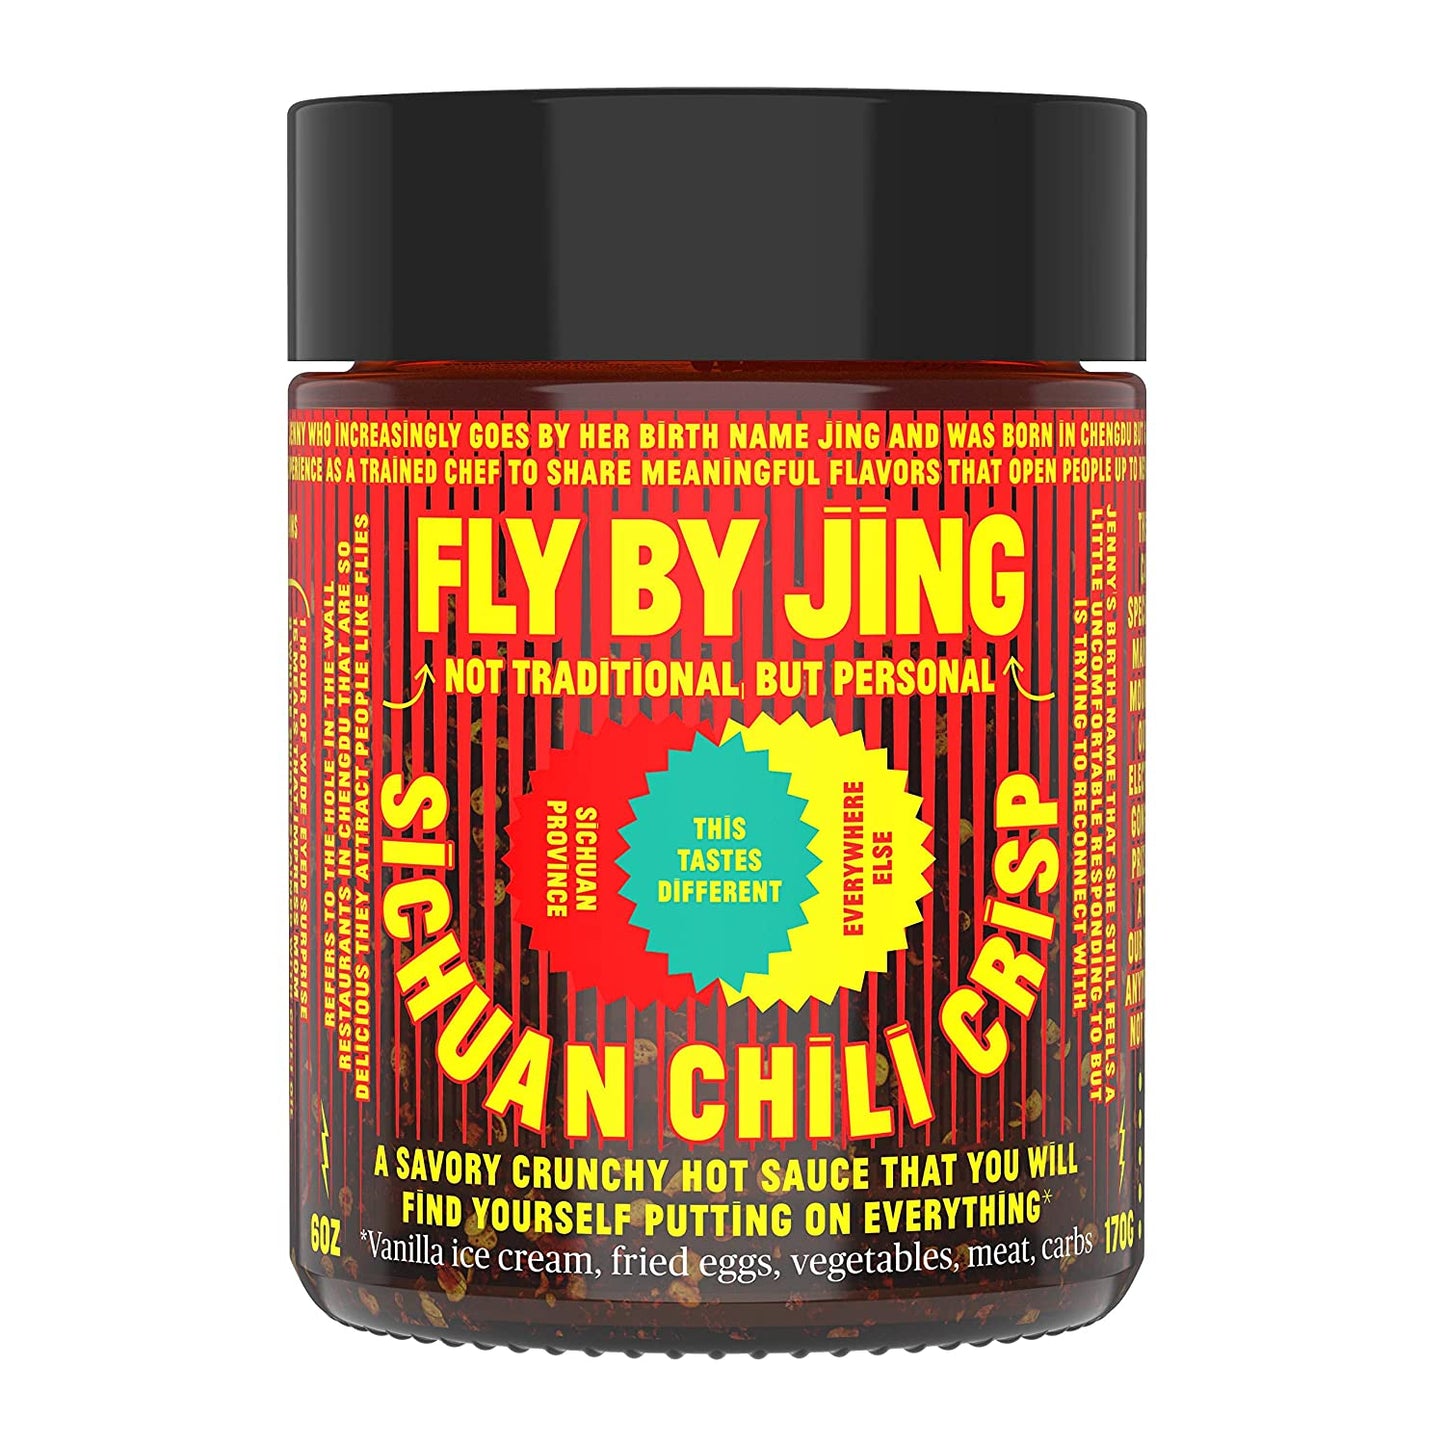 FLYBYJING Sichuan Chili Crisp, Gourmet Spicy Tingly Crunchy Hot Savory All-Natural Chili Oil Sauce w/Sichuan Pepper, Versatile Hot Sauce Good on Everything and Vegan, 6oz (Pack of 1)